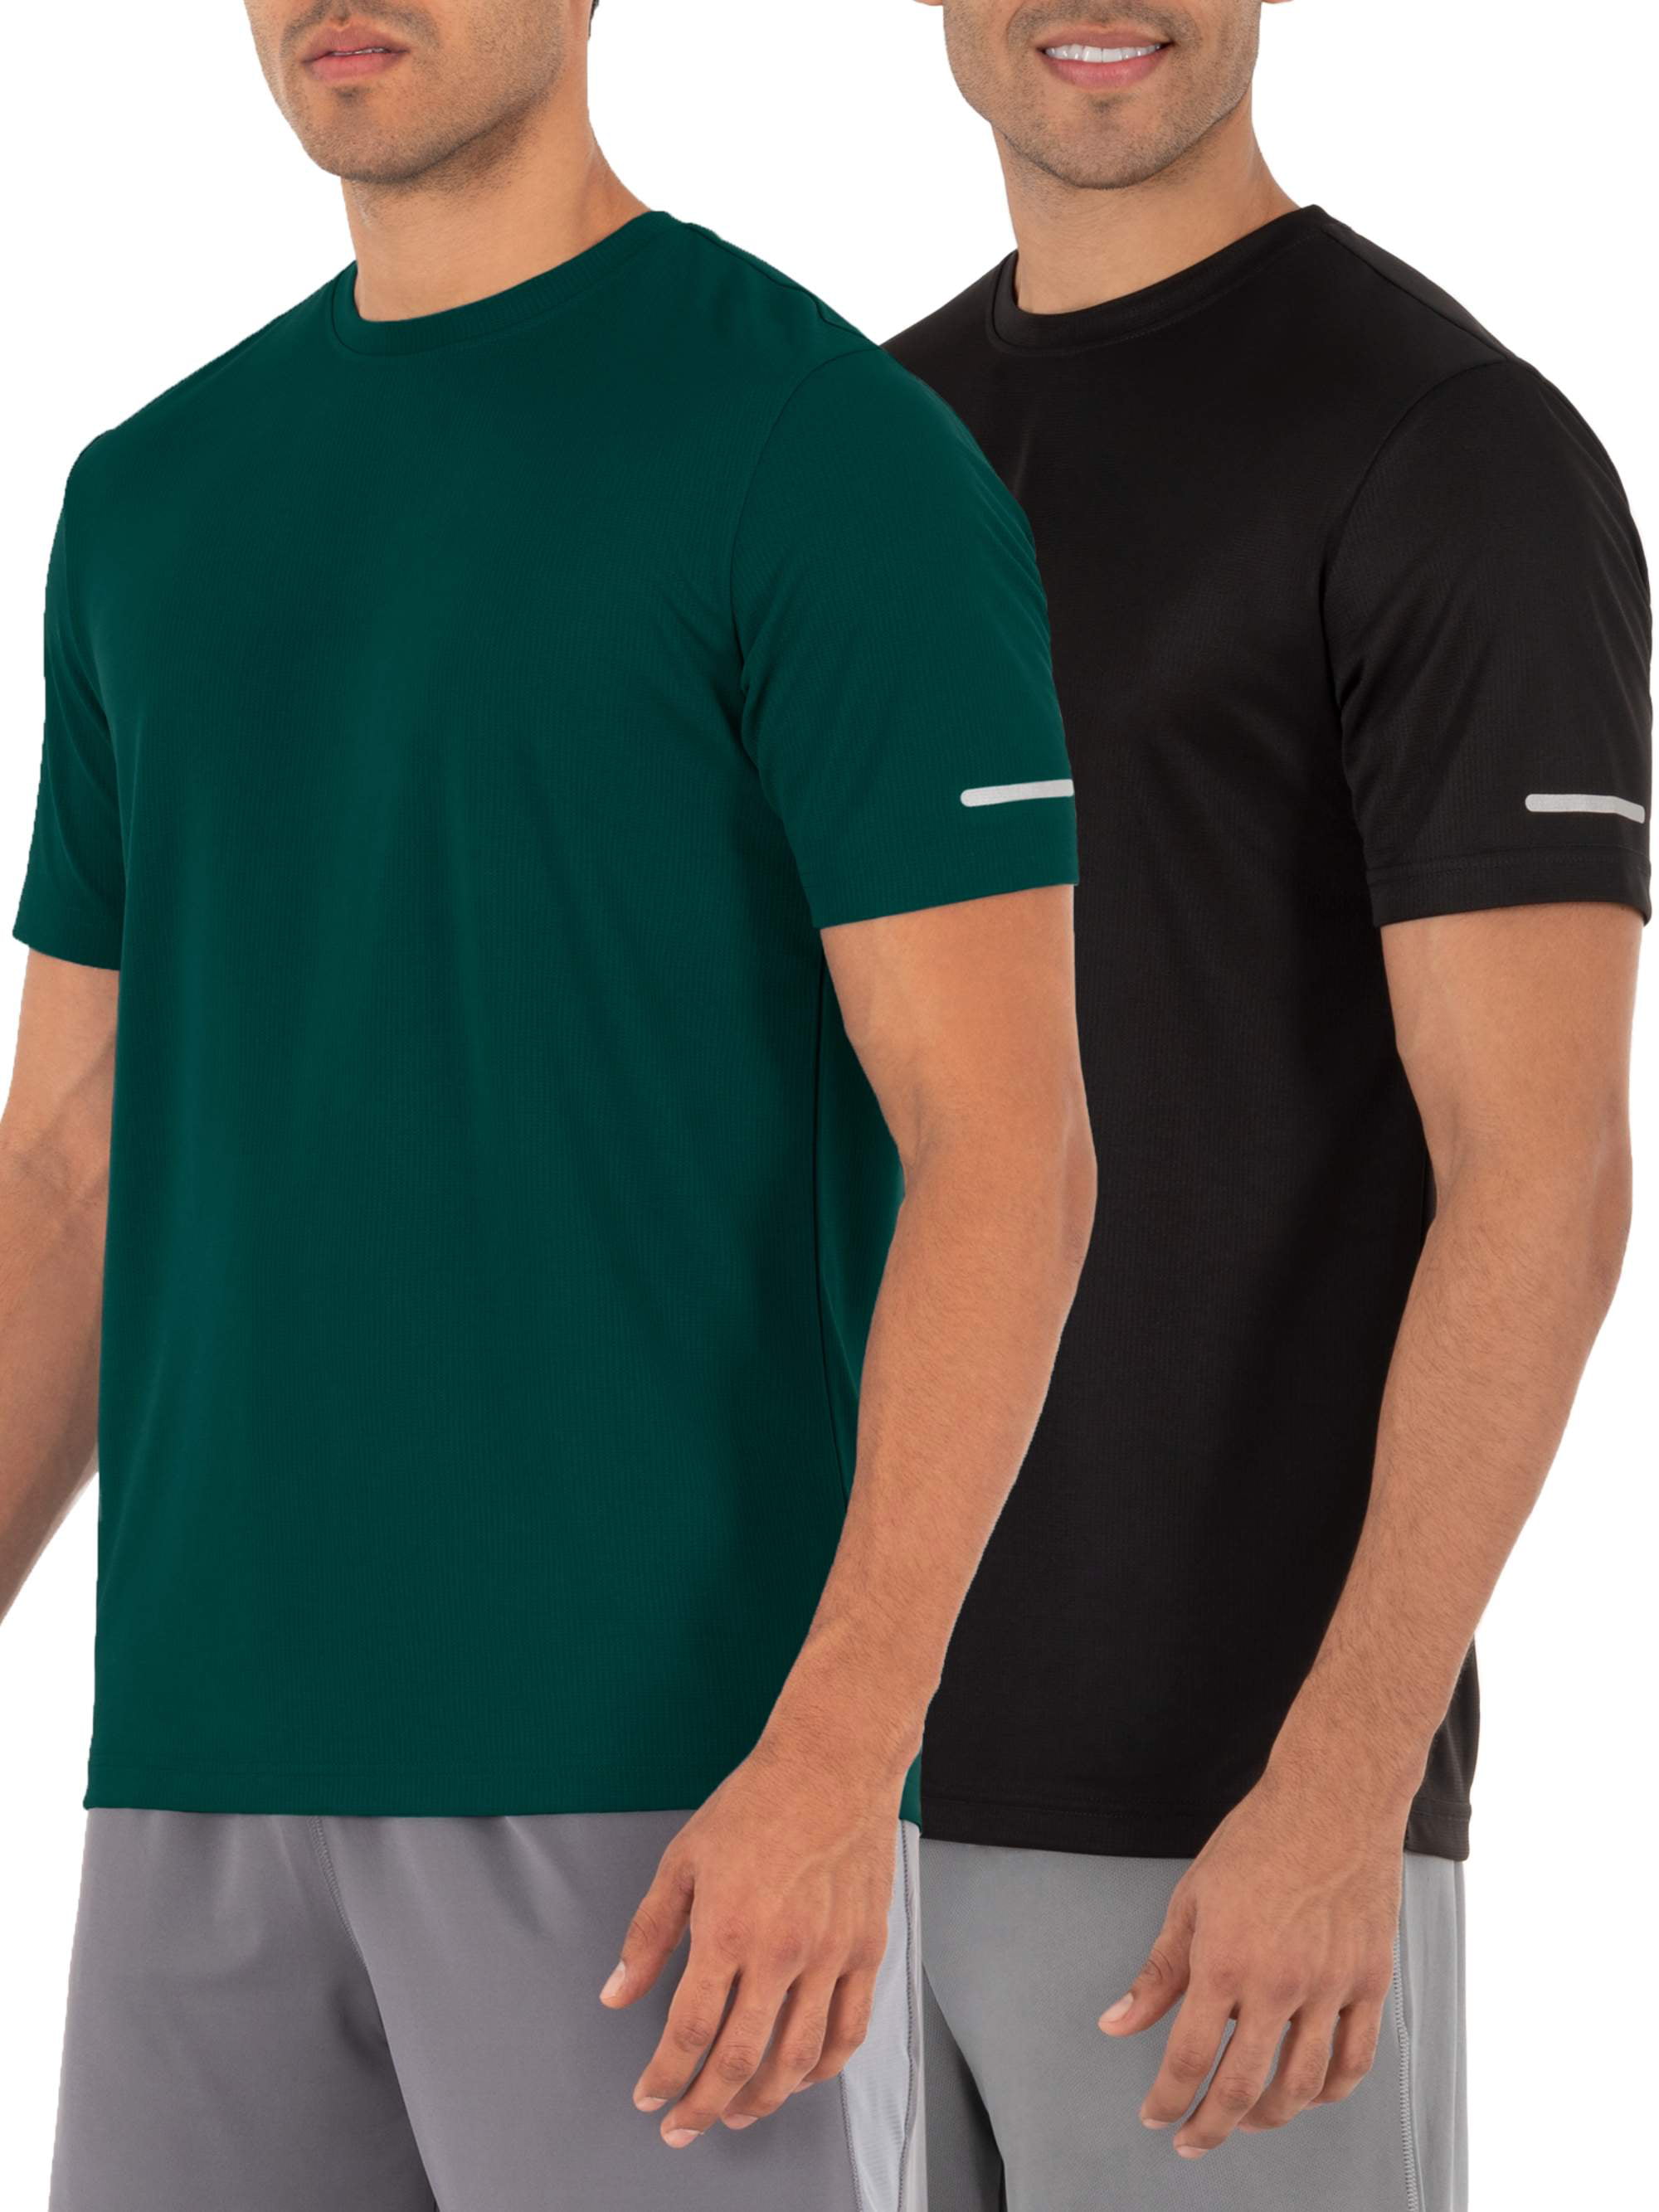 Details about   Quick Dry Running T-Shirts Outdoors Men Tops Slim  breathable Absorb sweat shirt 